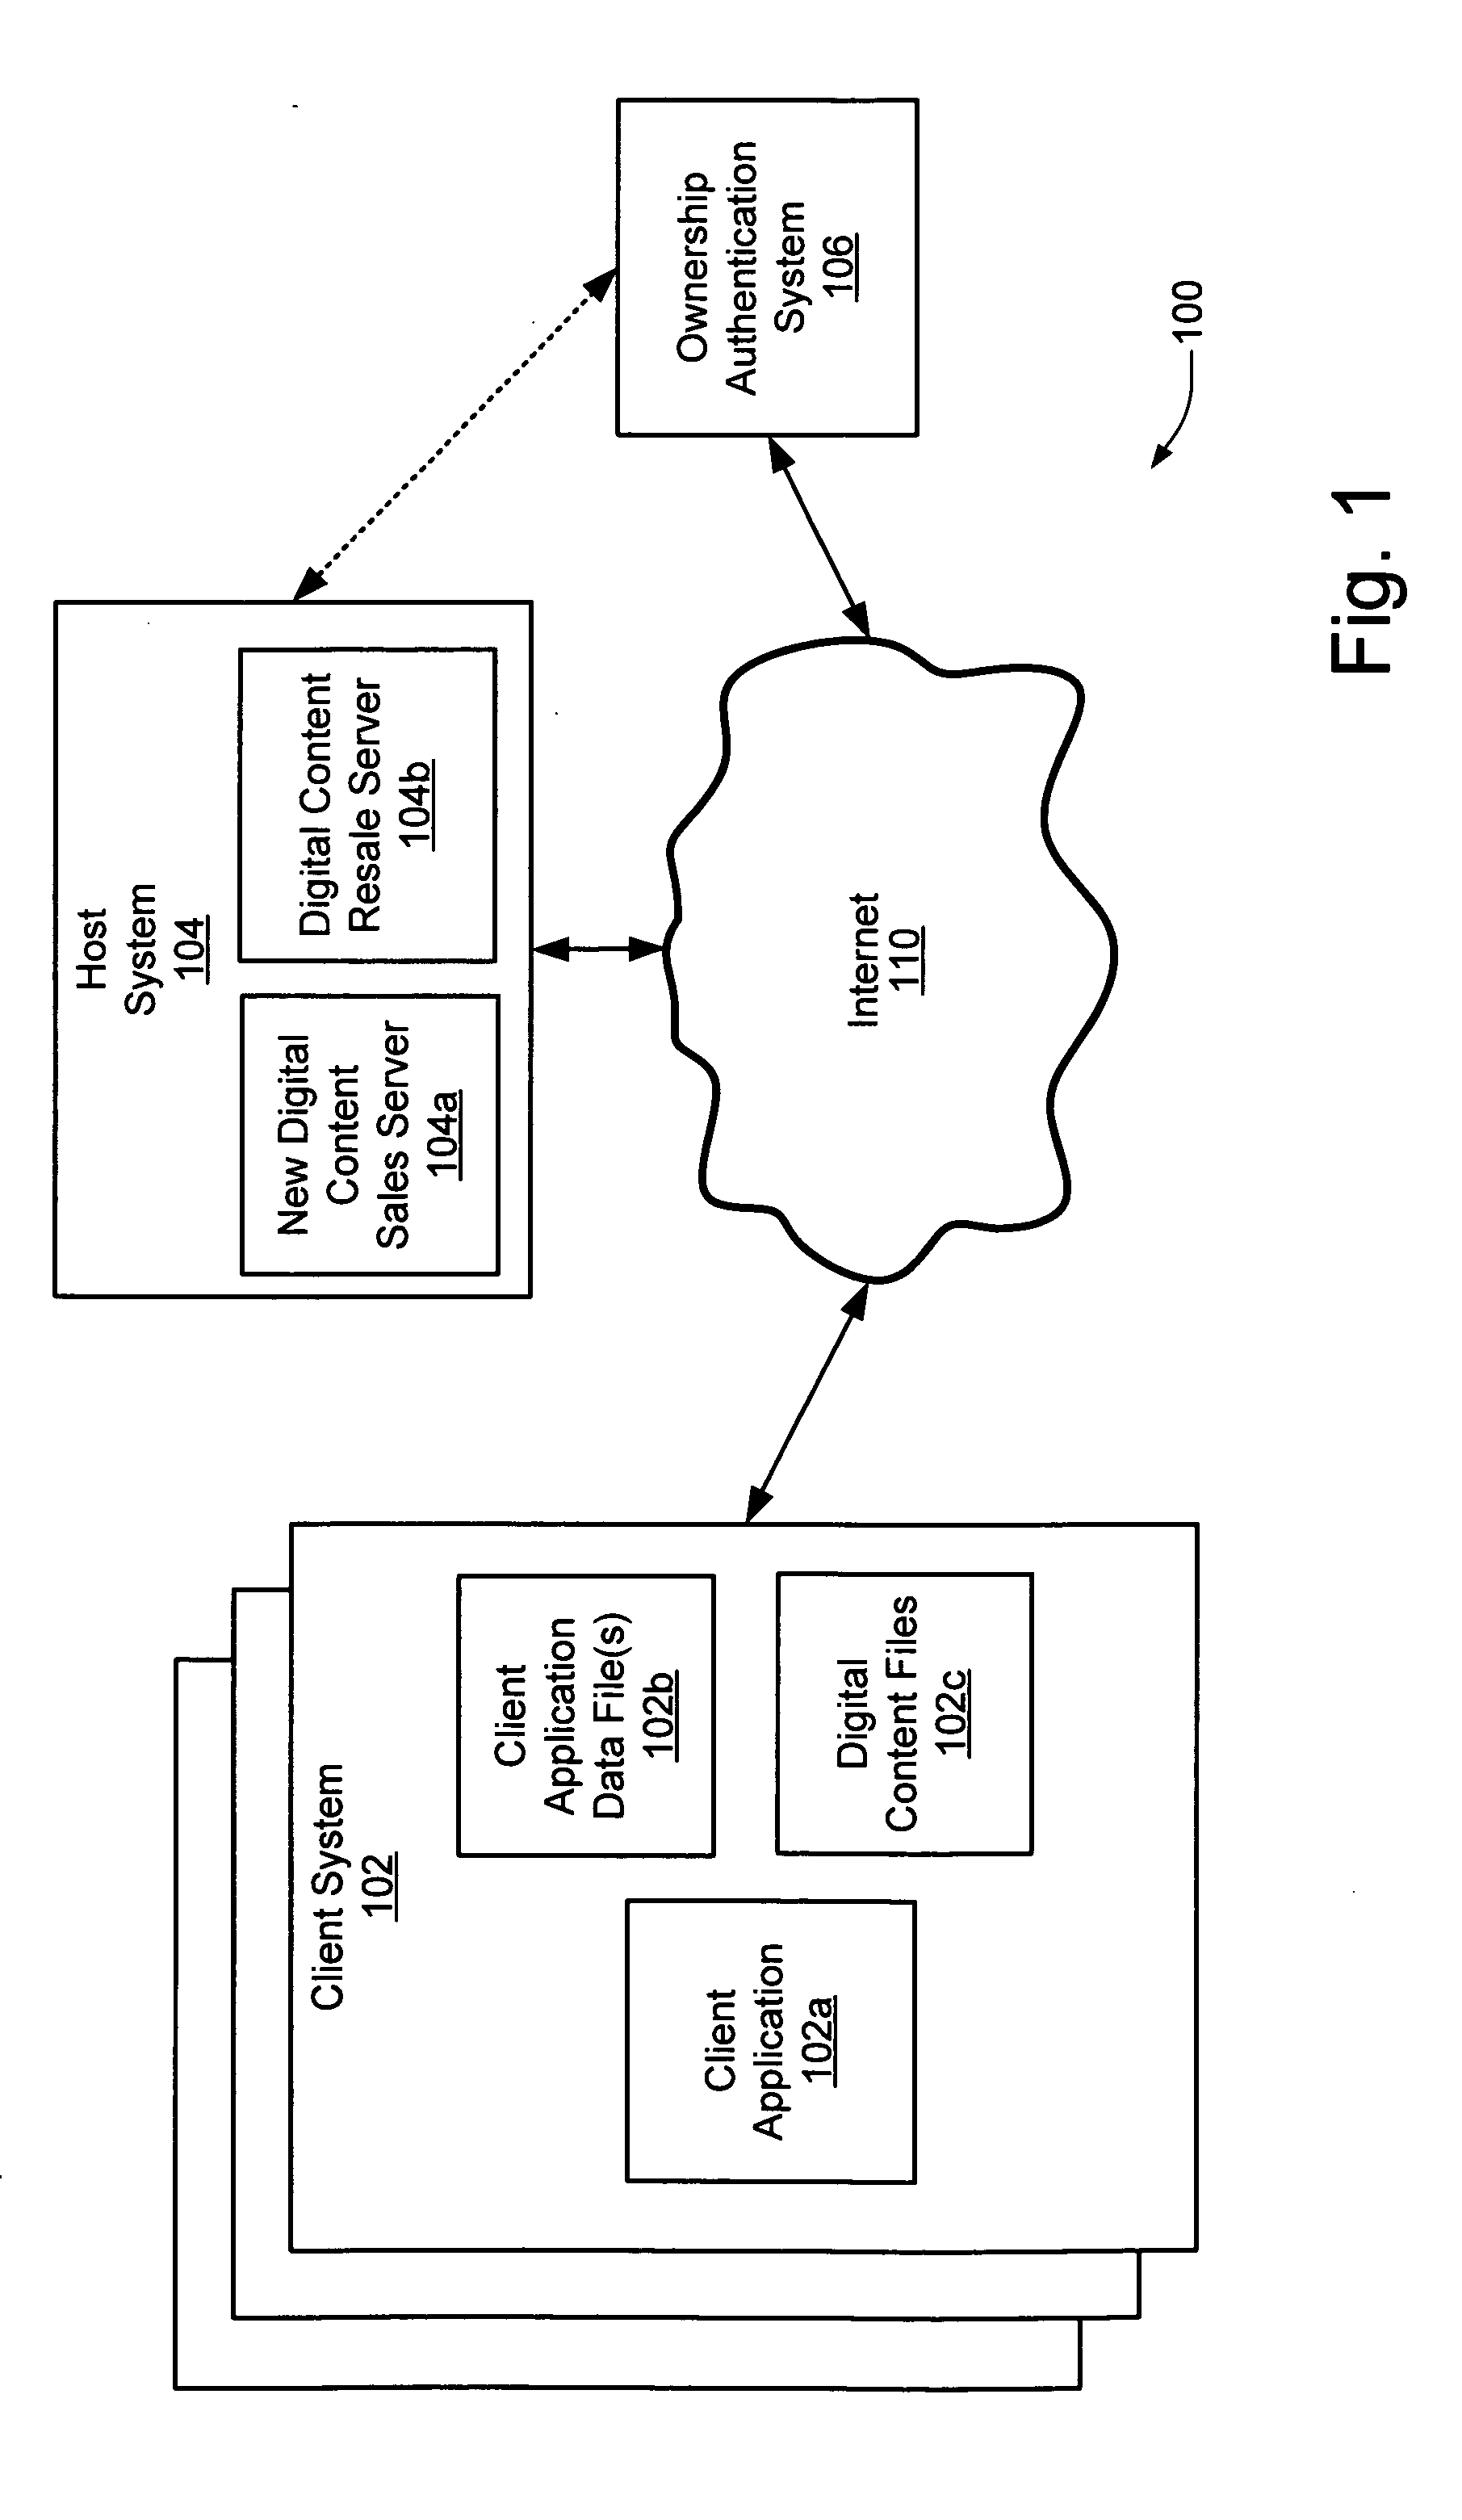 Technique for facilitating resale of digital content over a computer network